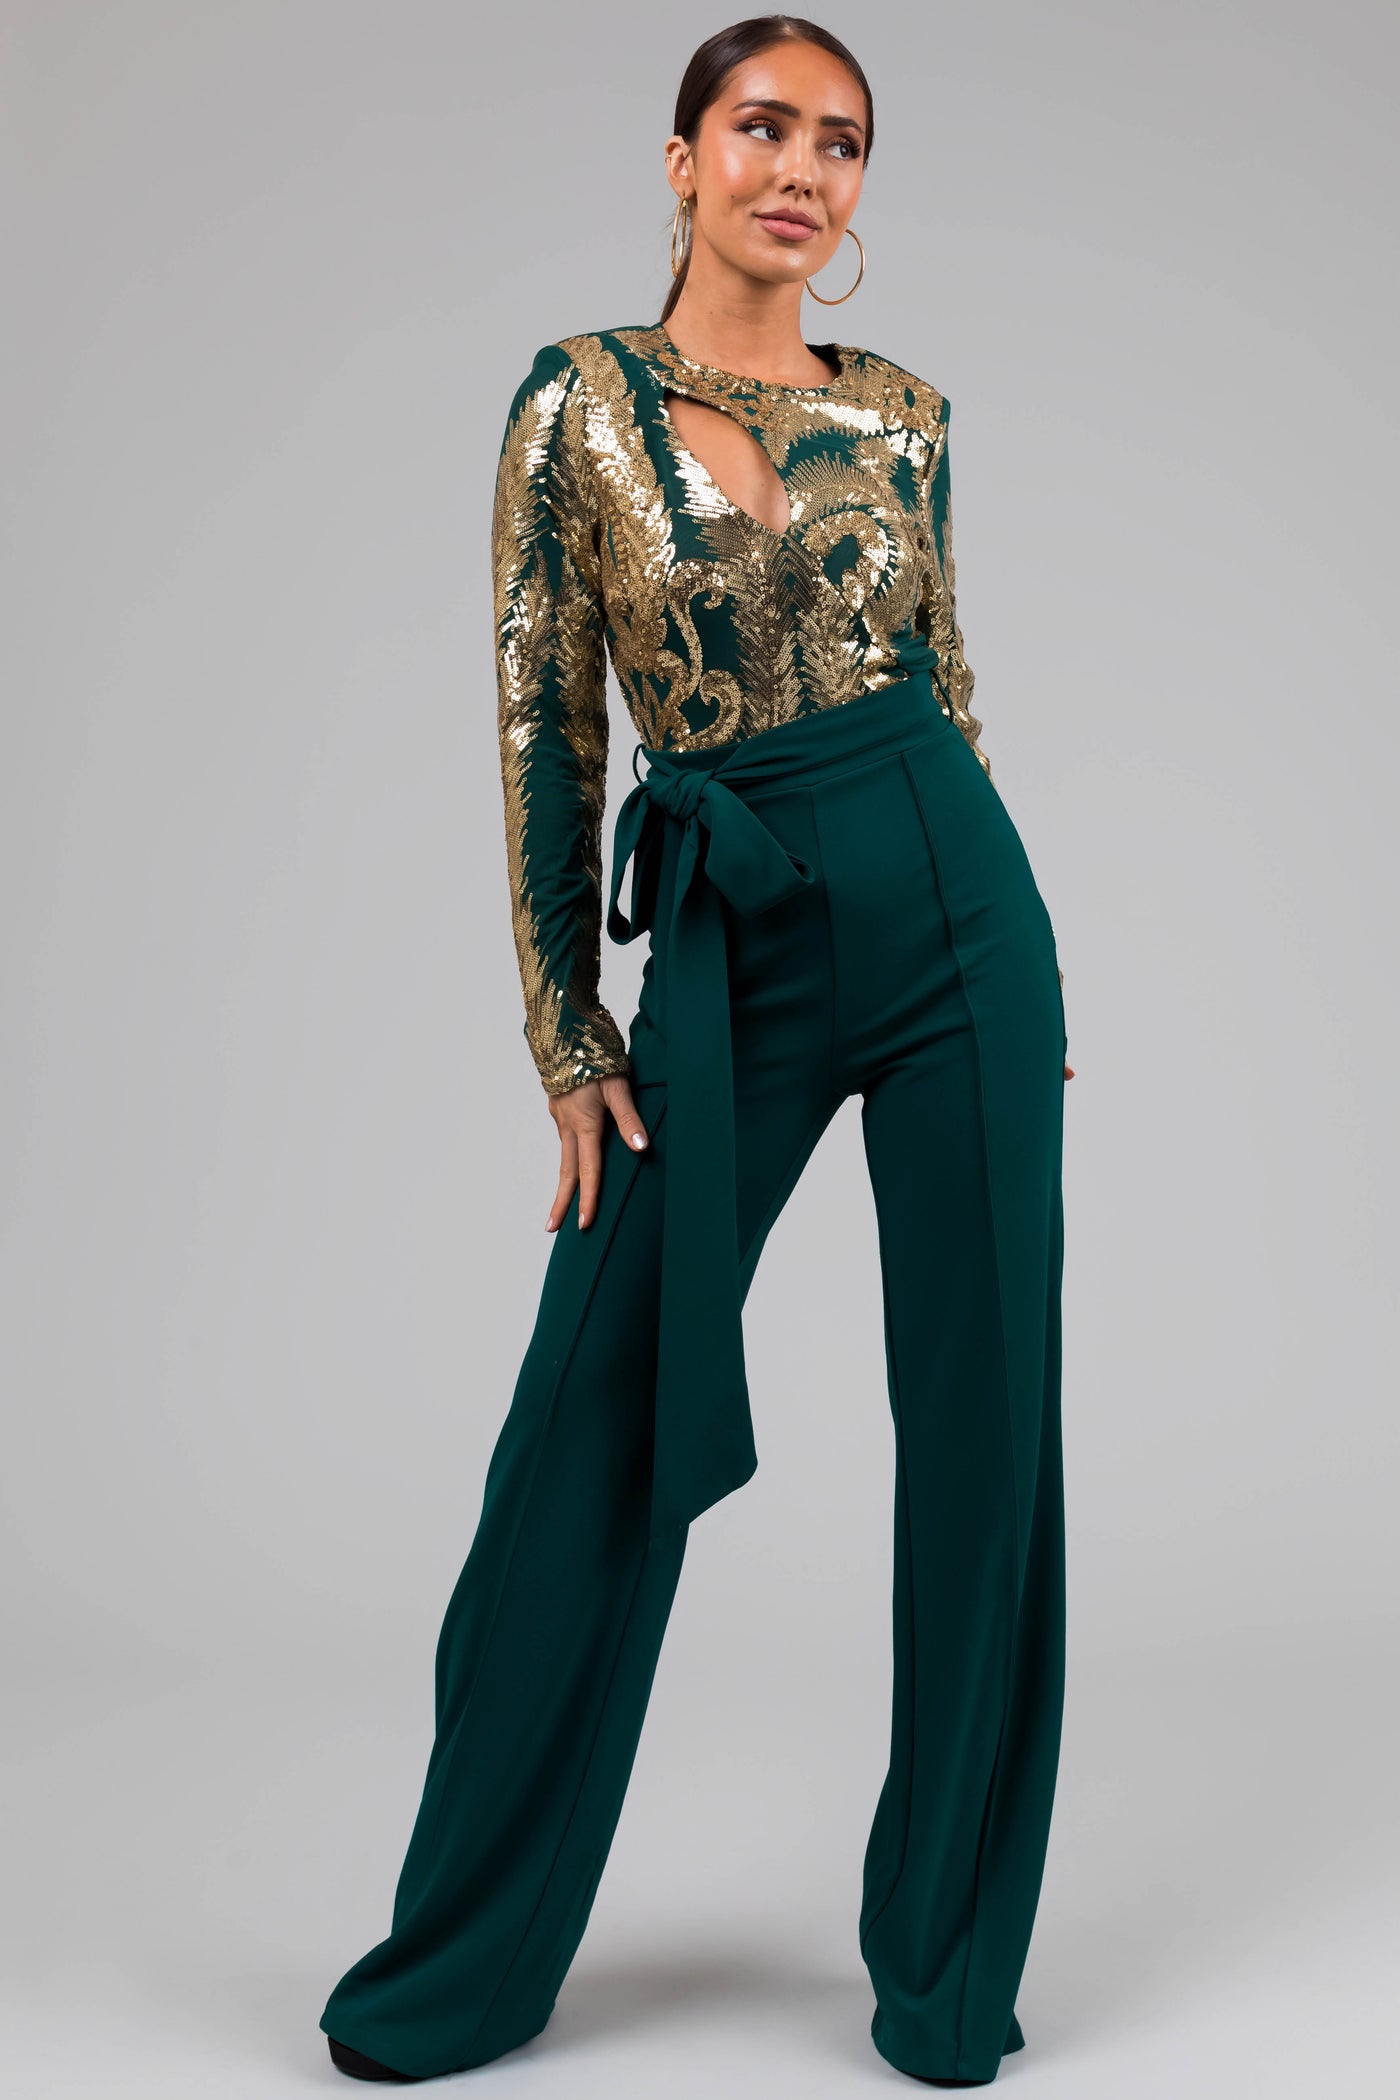 Hunter Green and Gold Sequin Print Jumpsuit